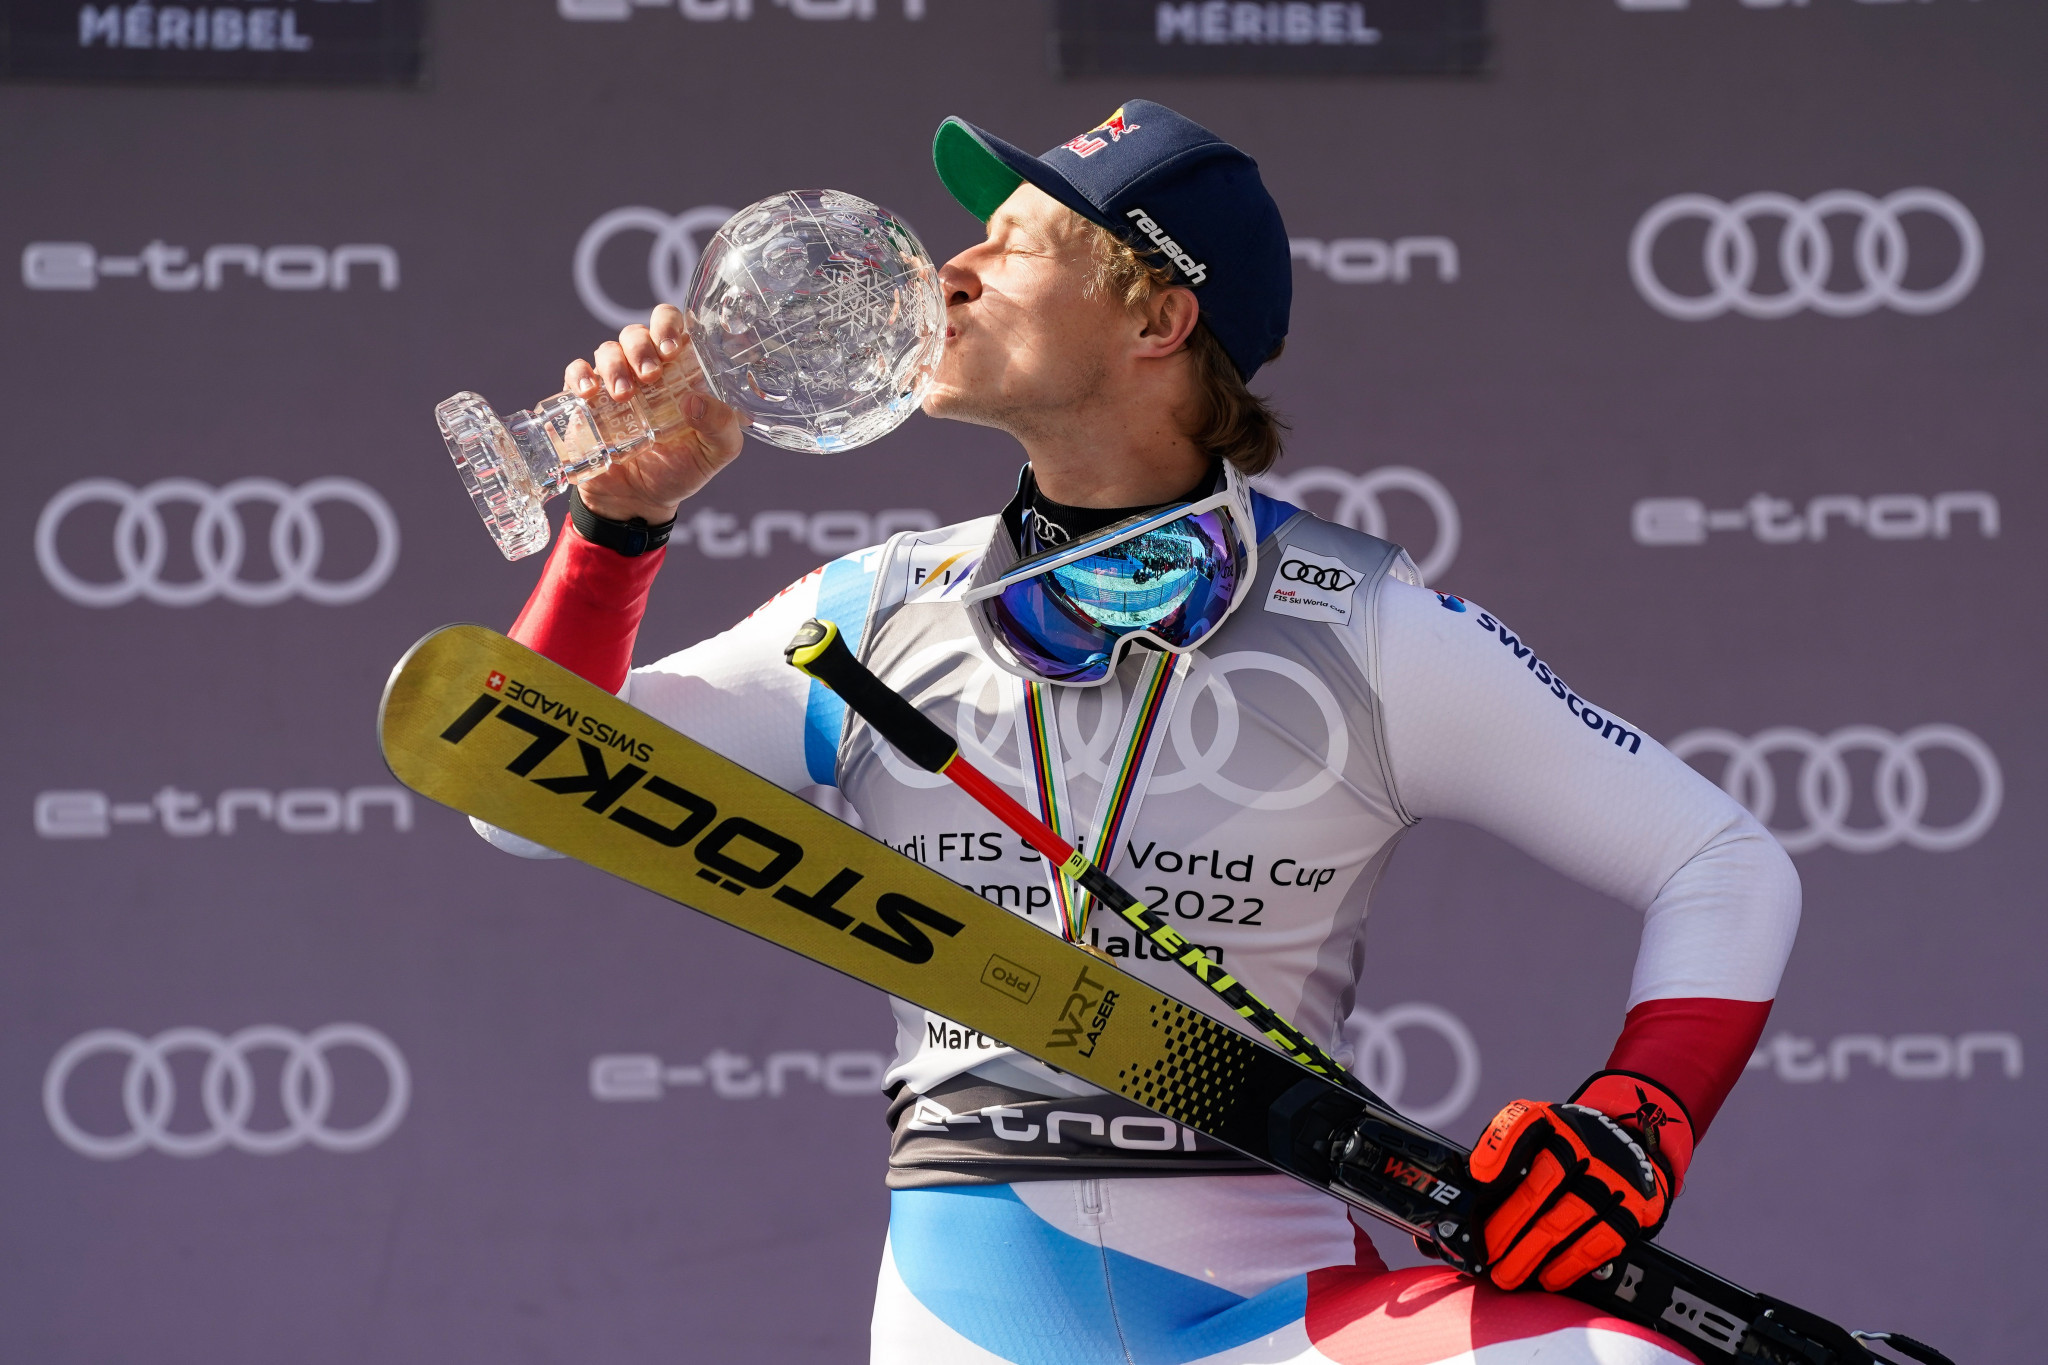 Marco Odermatt gets his hands on the giant slalom Crystal Globe after securing another World Cup win ©Getty Images